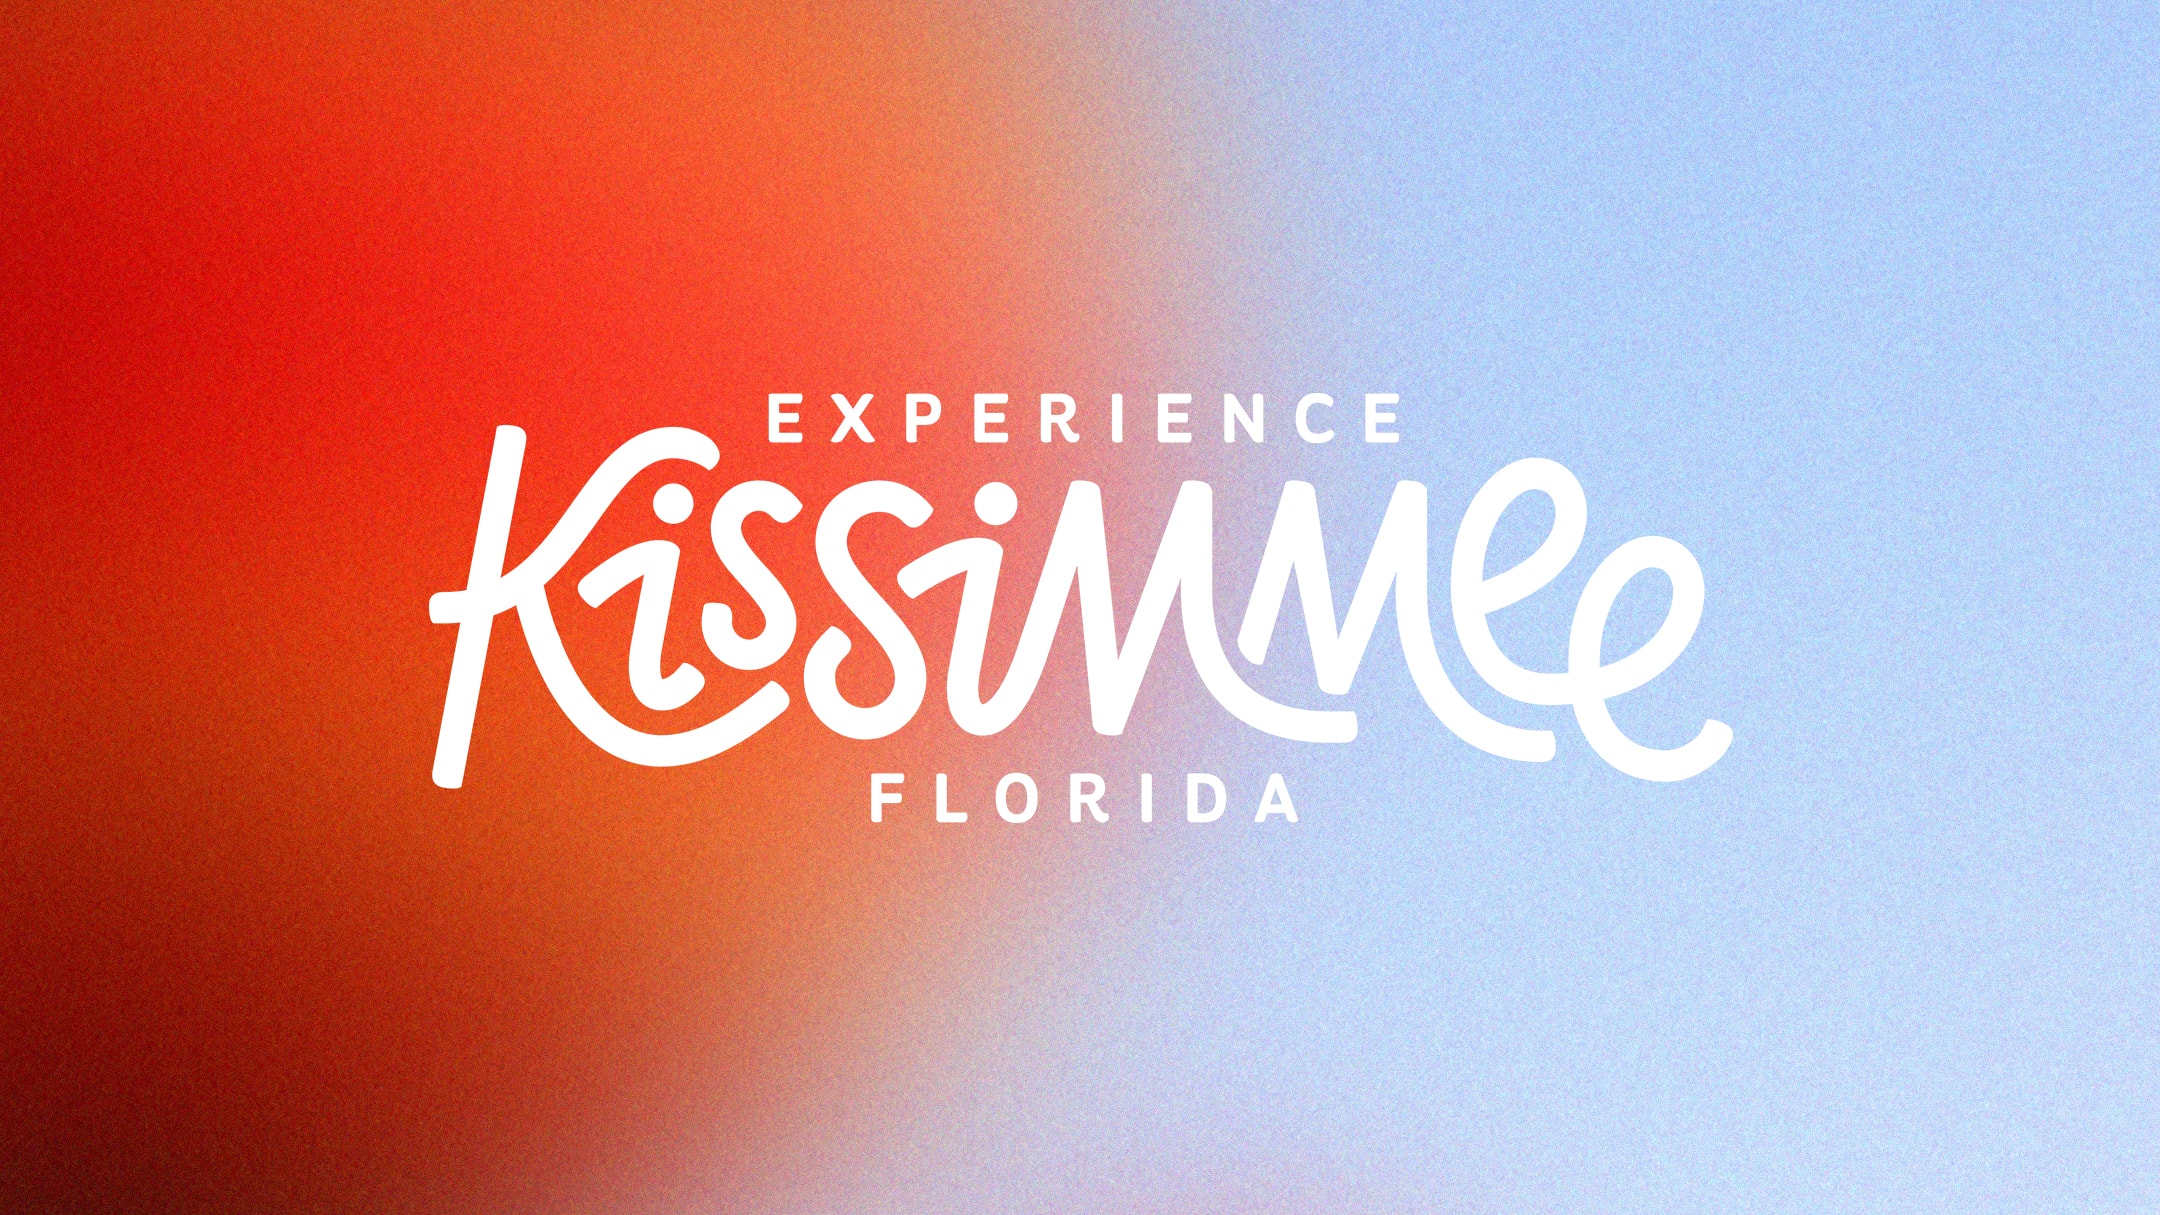 Experience Kissimmee Destination marketing and rebrand -new logo design